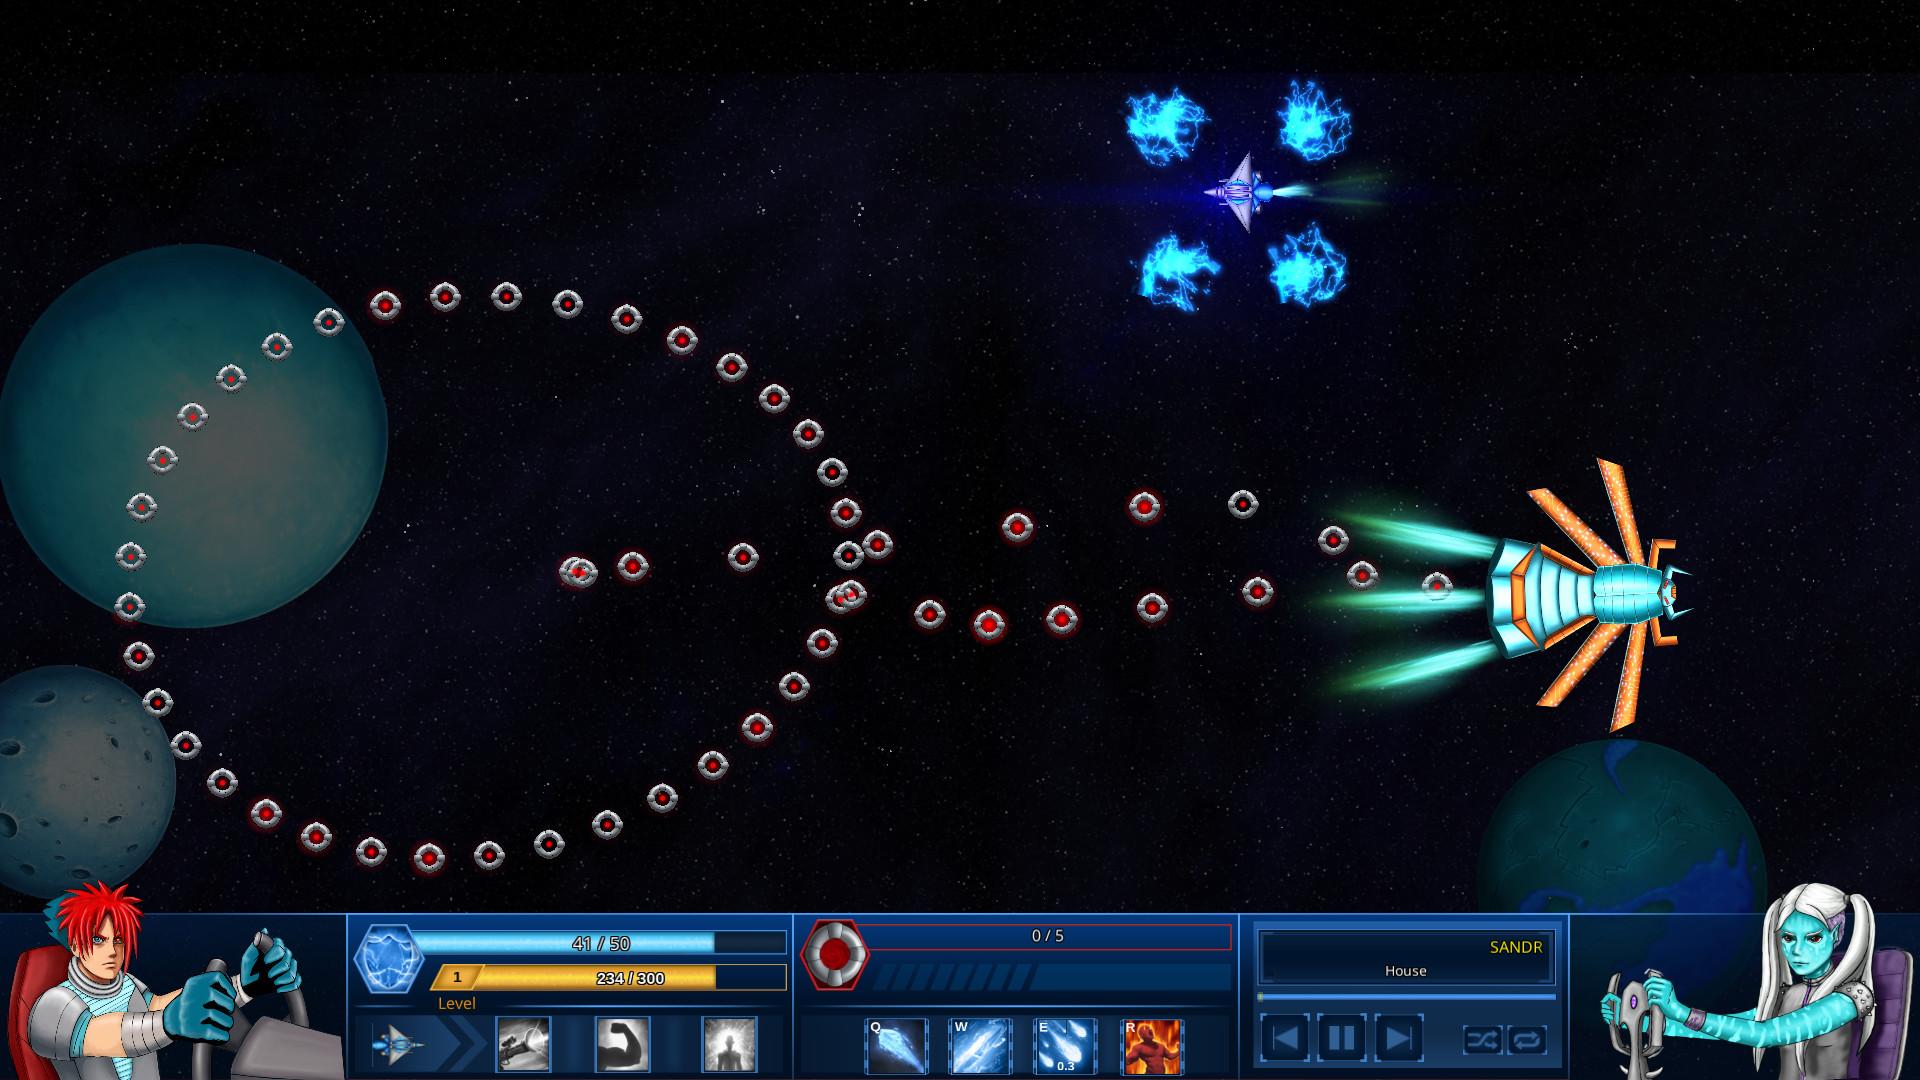 Screenshot №17 from game Survive in Space